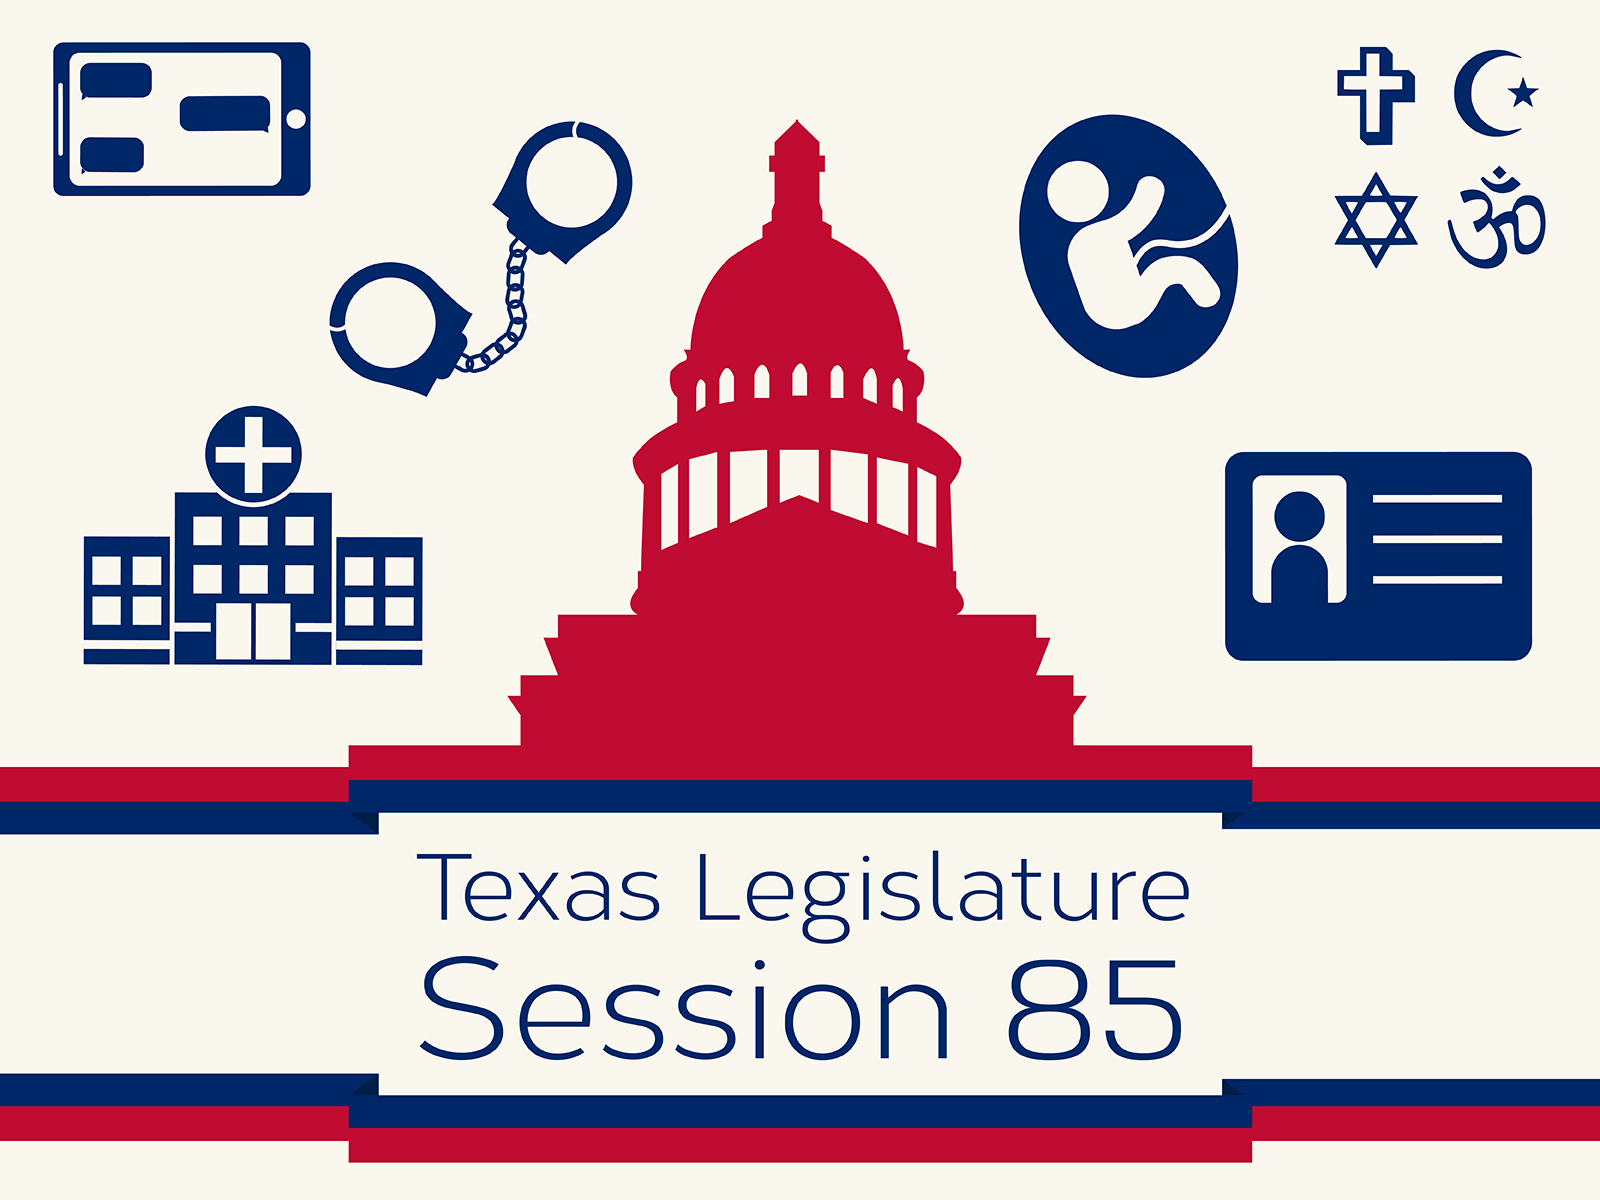 GRAPHIC: A silhouette of the Texas capitol building is surrounded by vector images representing some of the topics of the 85th session of the Texas Legislature. Graphic by The Signal online editor, Krista Kamp.